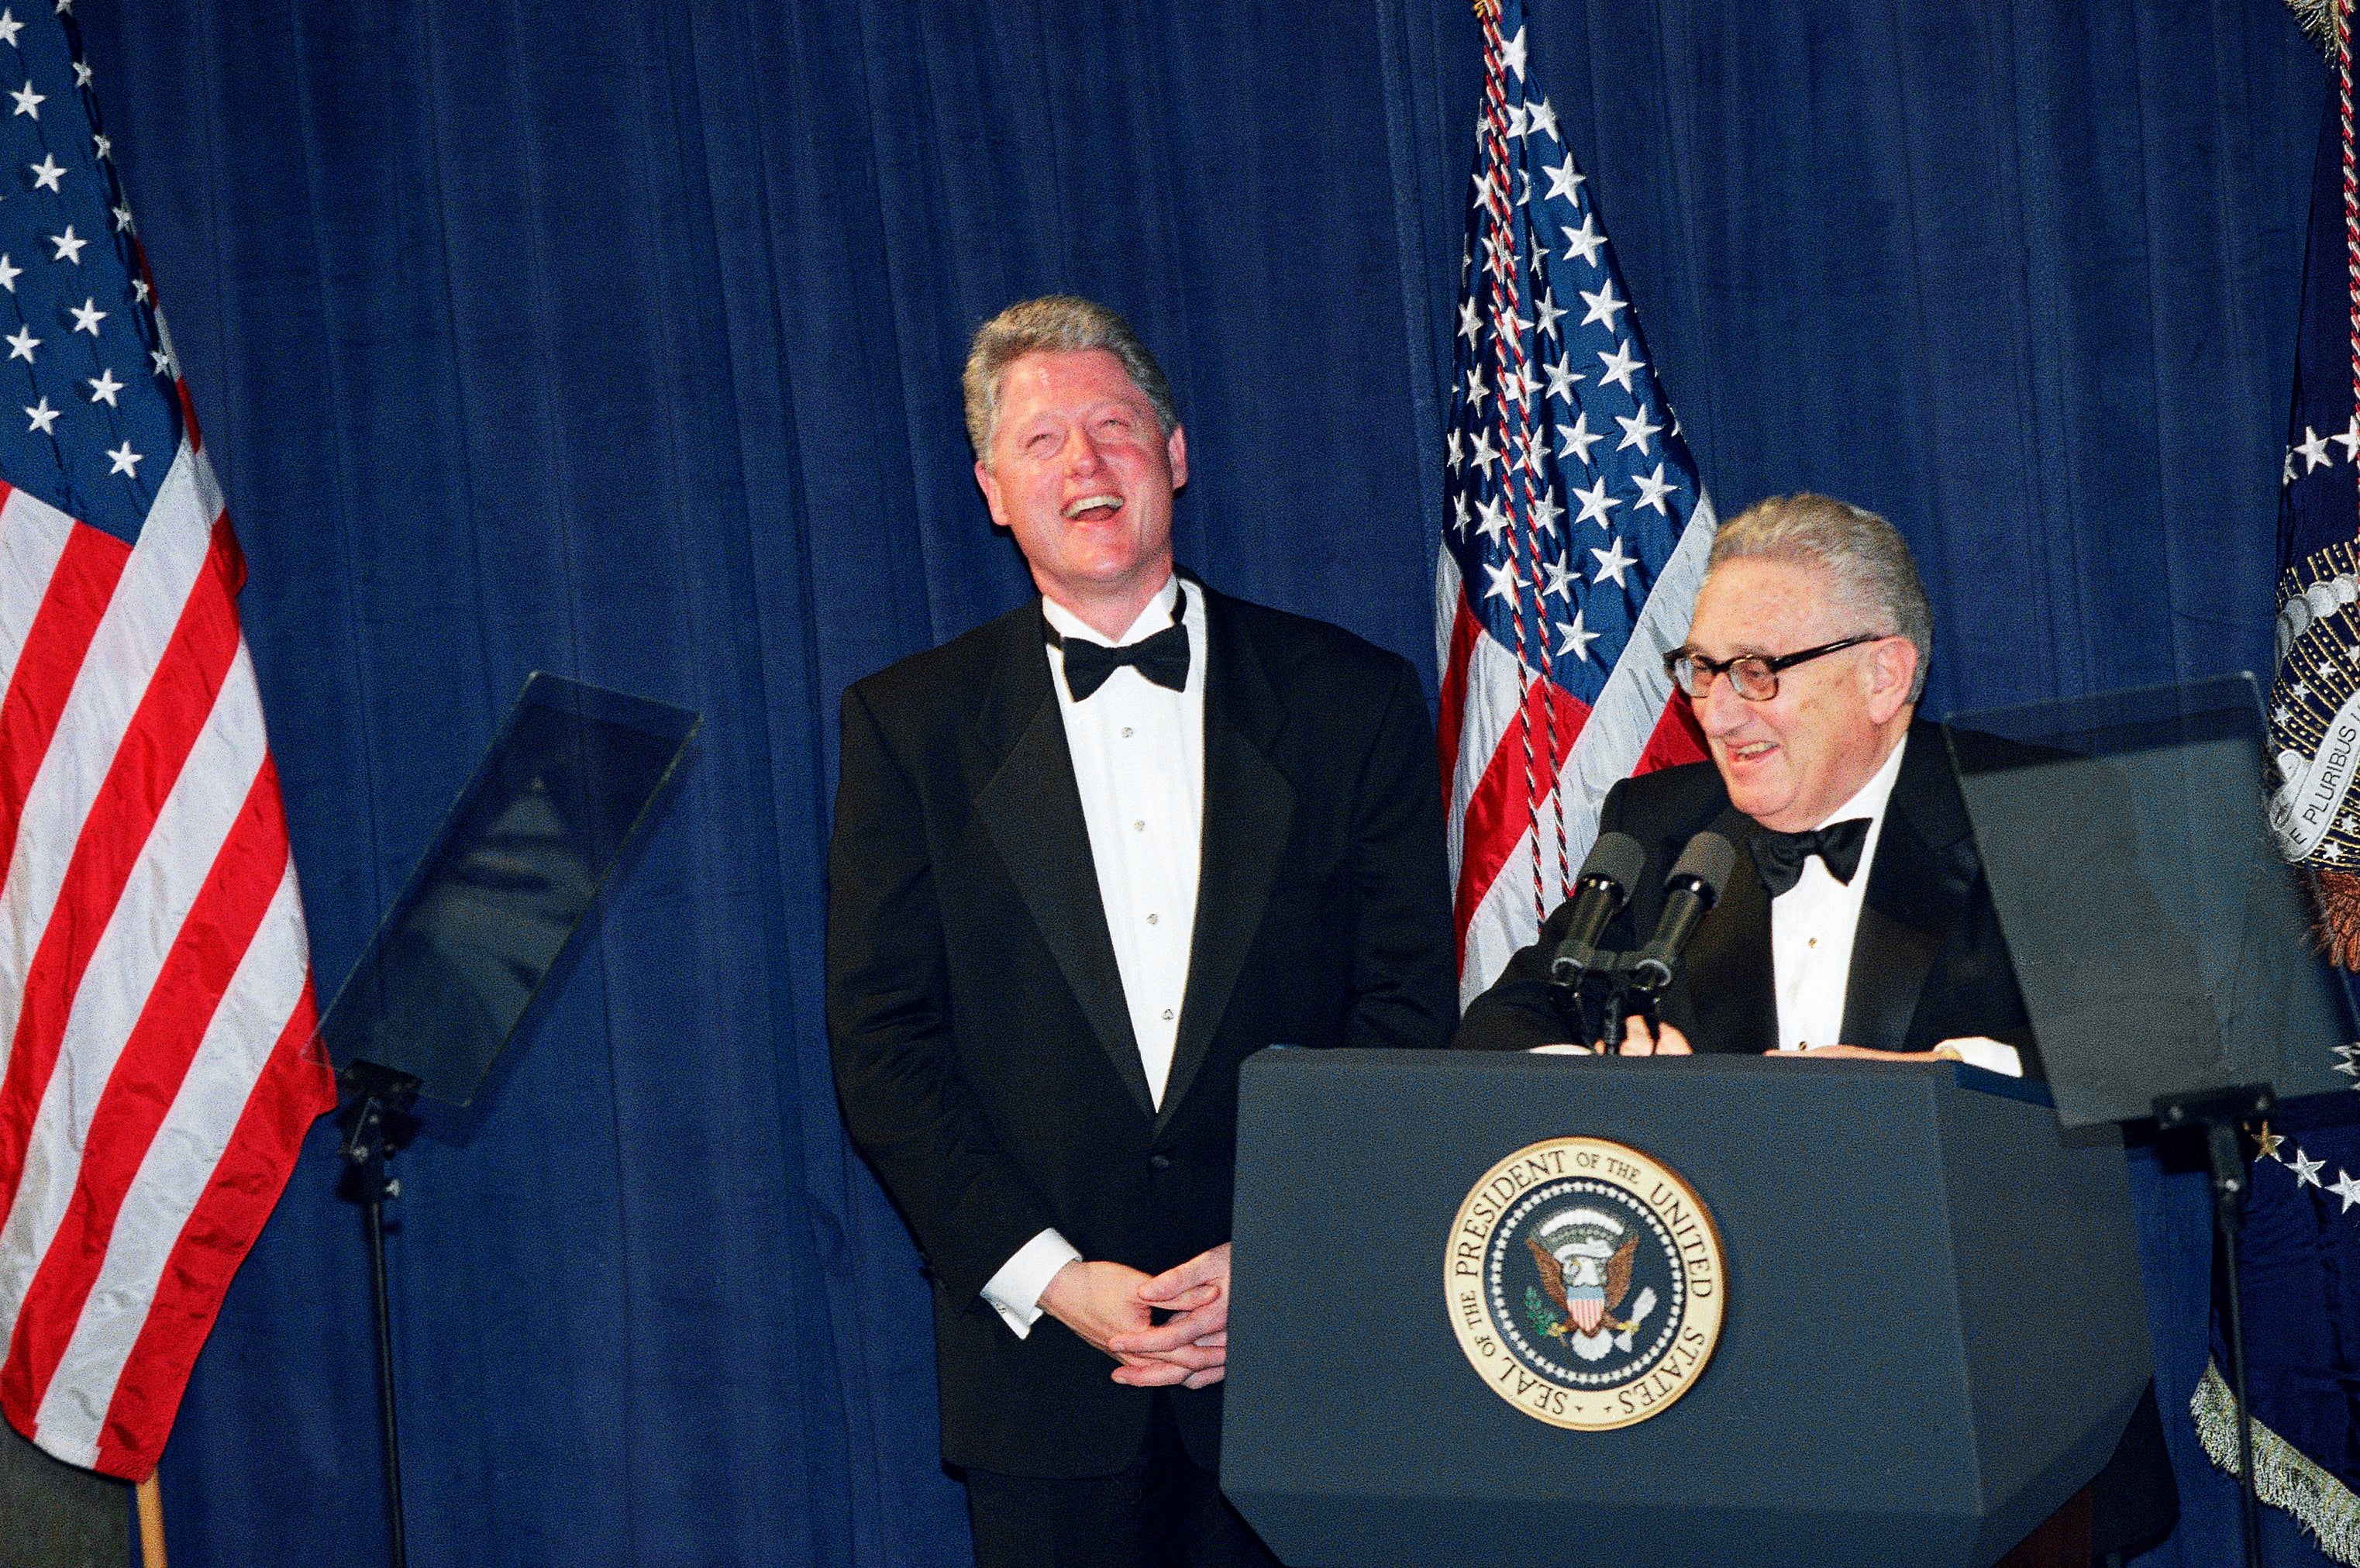 President Bill Clinton, left, and former Secretary of State Henry Kissinger laugh at a national policy conference, March 1, 1995